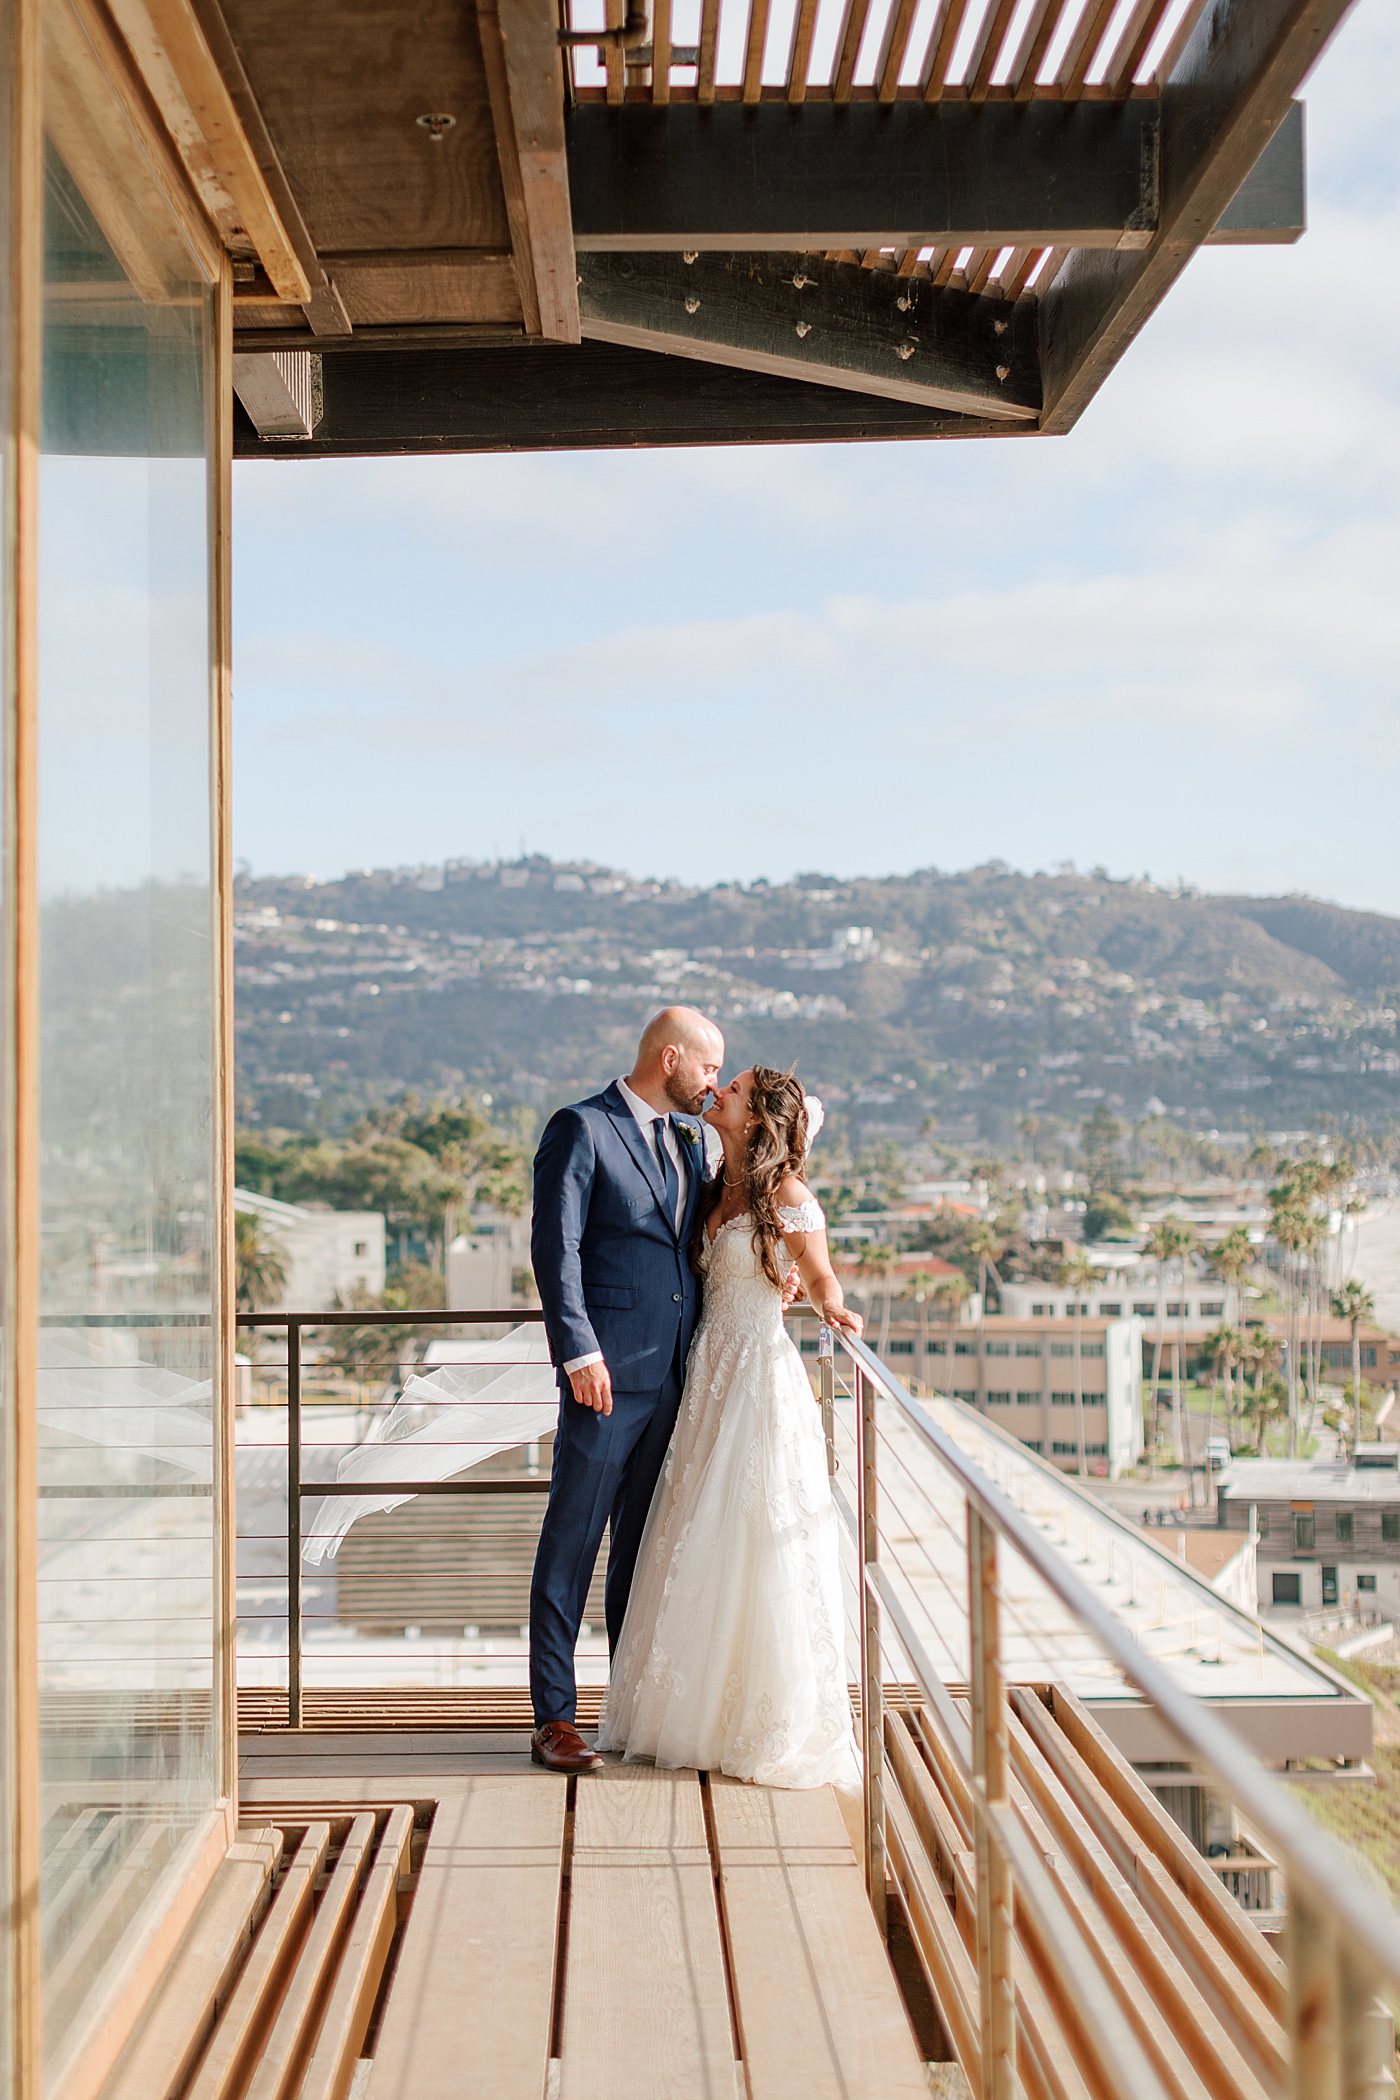 Groom in navy suit and bride in wedding dress standing closely and smiling at each other on a wooden balcony that overlooks a tropical, sunny city | Image by San Diego Wedding Photographer Hope Helmuth